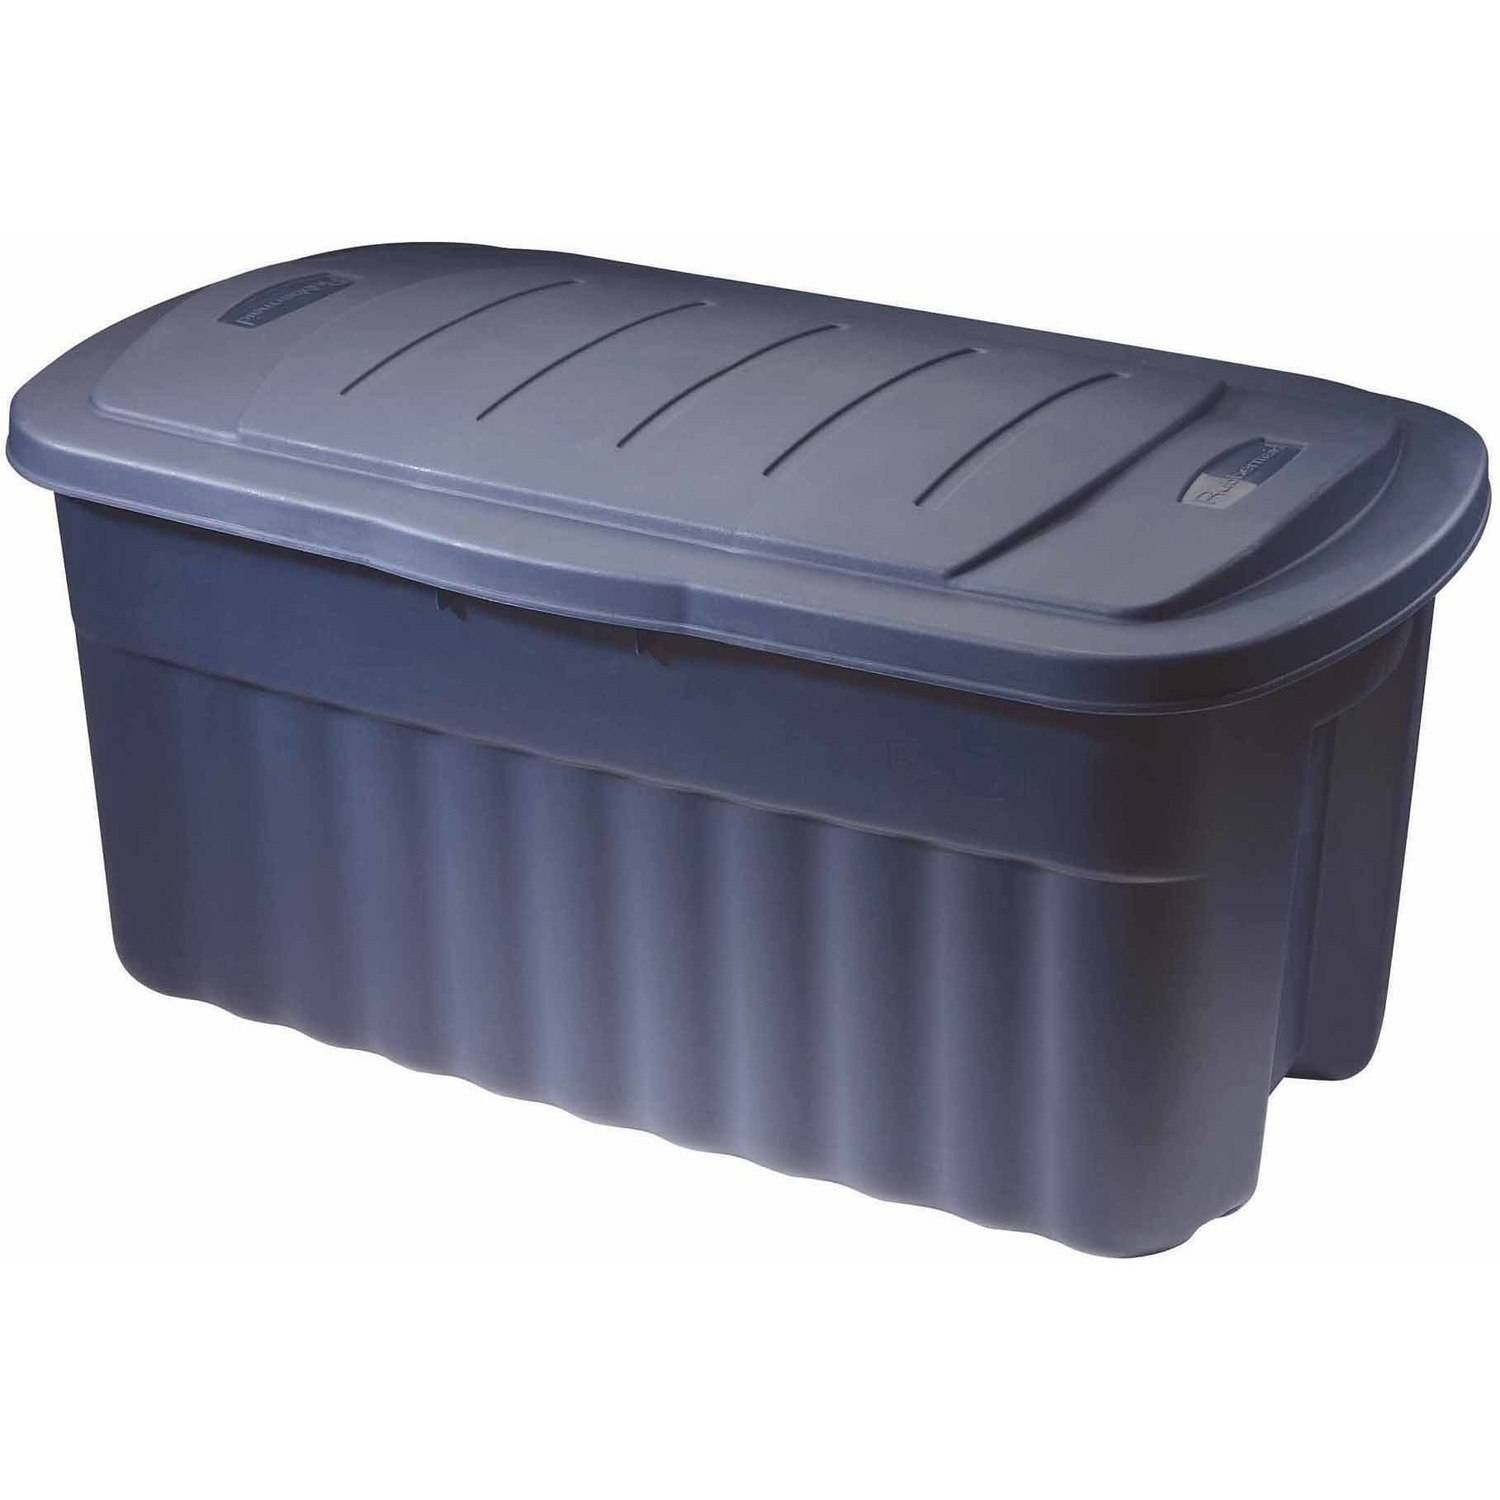 30 Quart Latching Lid Storage Tote Walmart intended for proportions 1500 X 1500